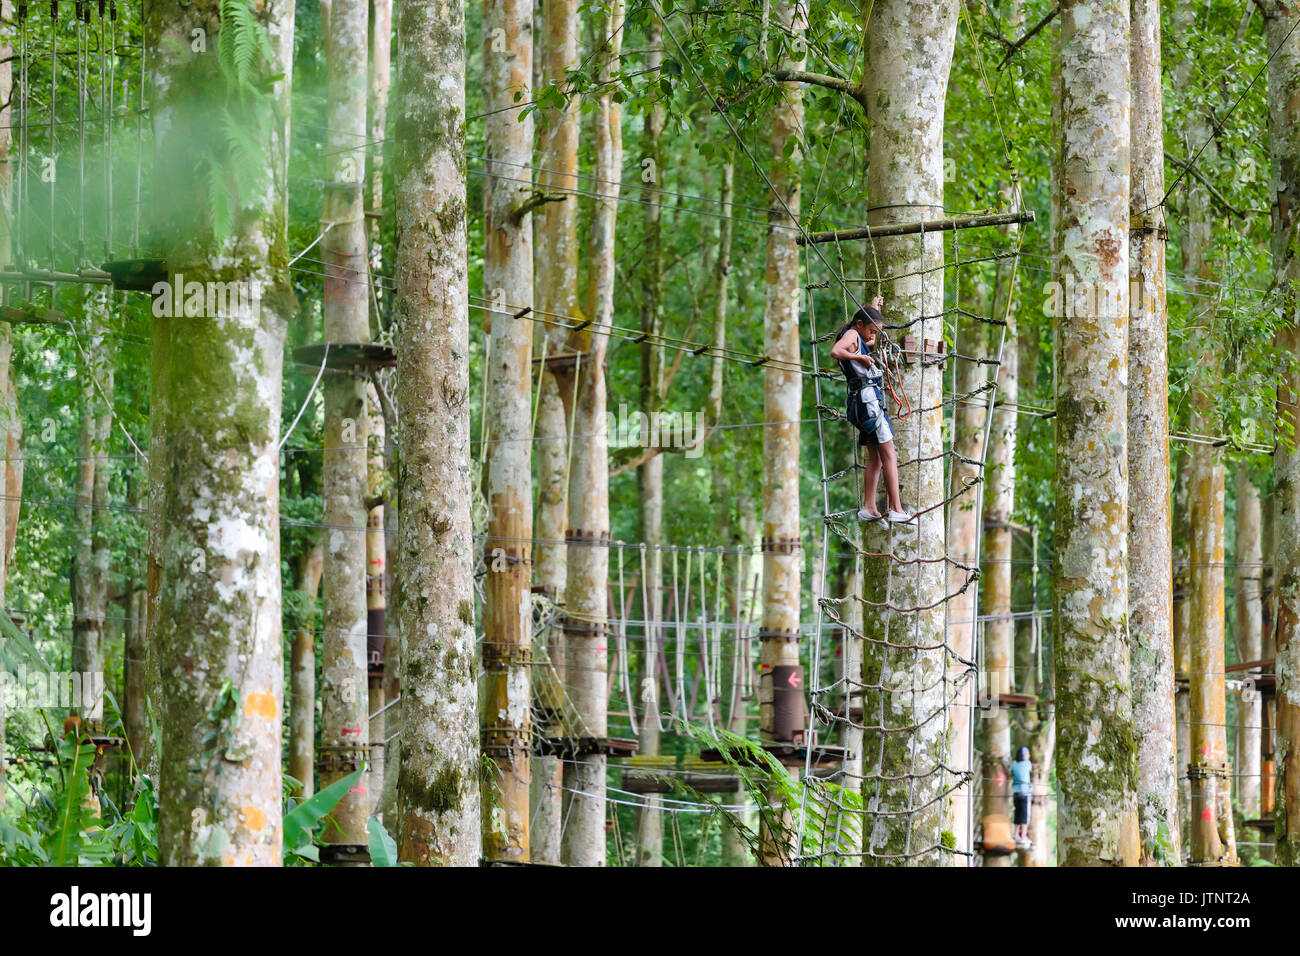 A girl ties into a zipline at a treetop Adventure Park, Bali, Indonesia Stock Photo